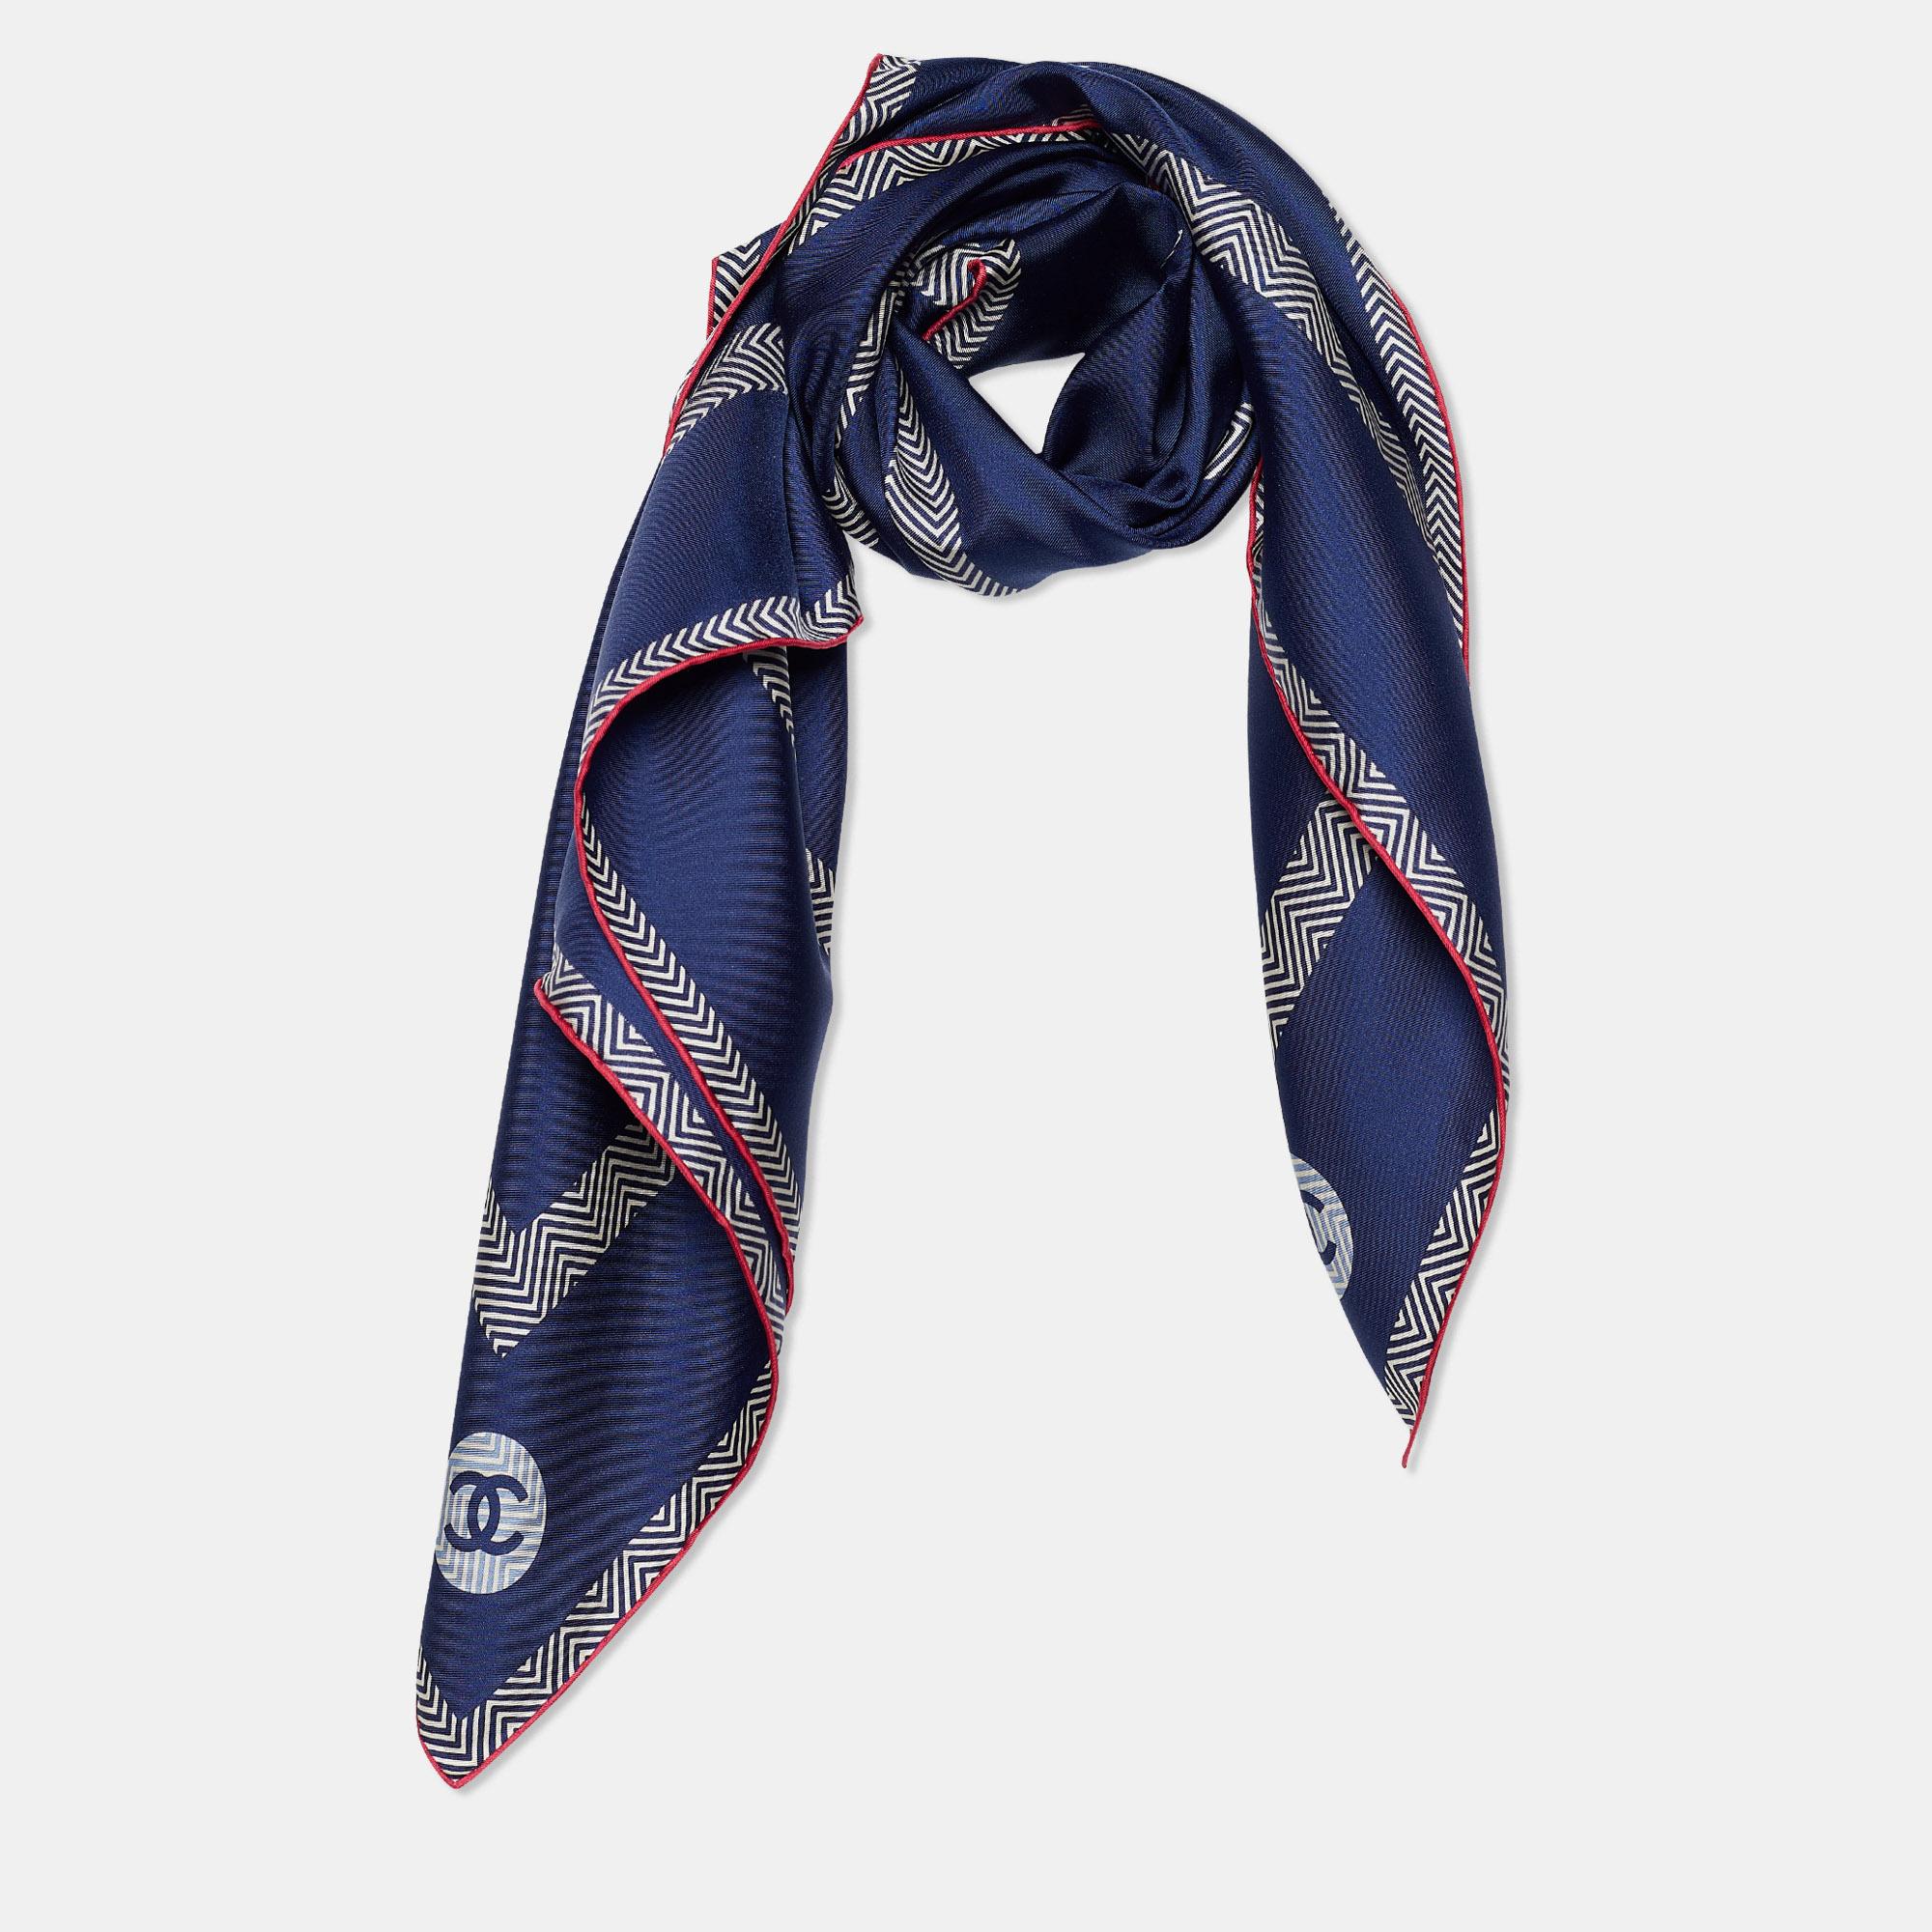 The perfect punctuation to your stylish look will be this Chanel scarf! It has been stitched using soft silk in a navy blue shade and adorned with iconic CC logo prints. Wrap it around your neck to accessorize the chic way!

